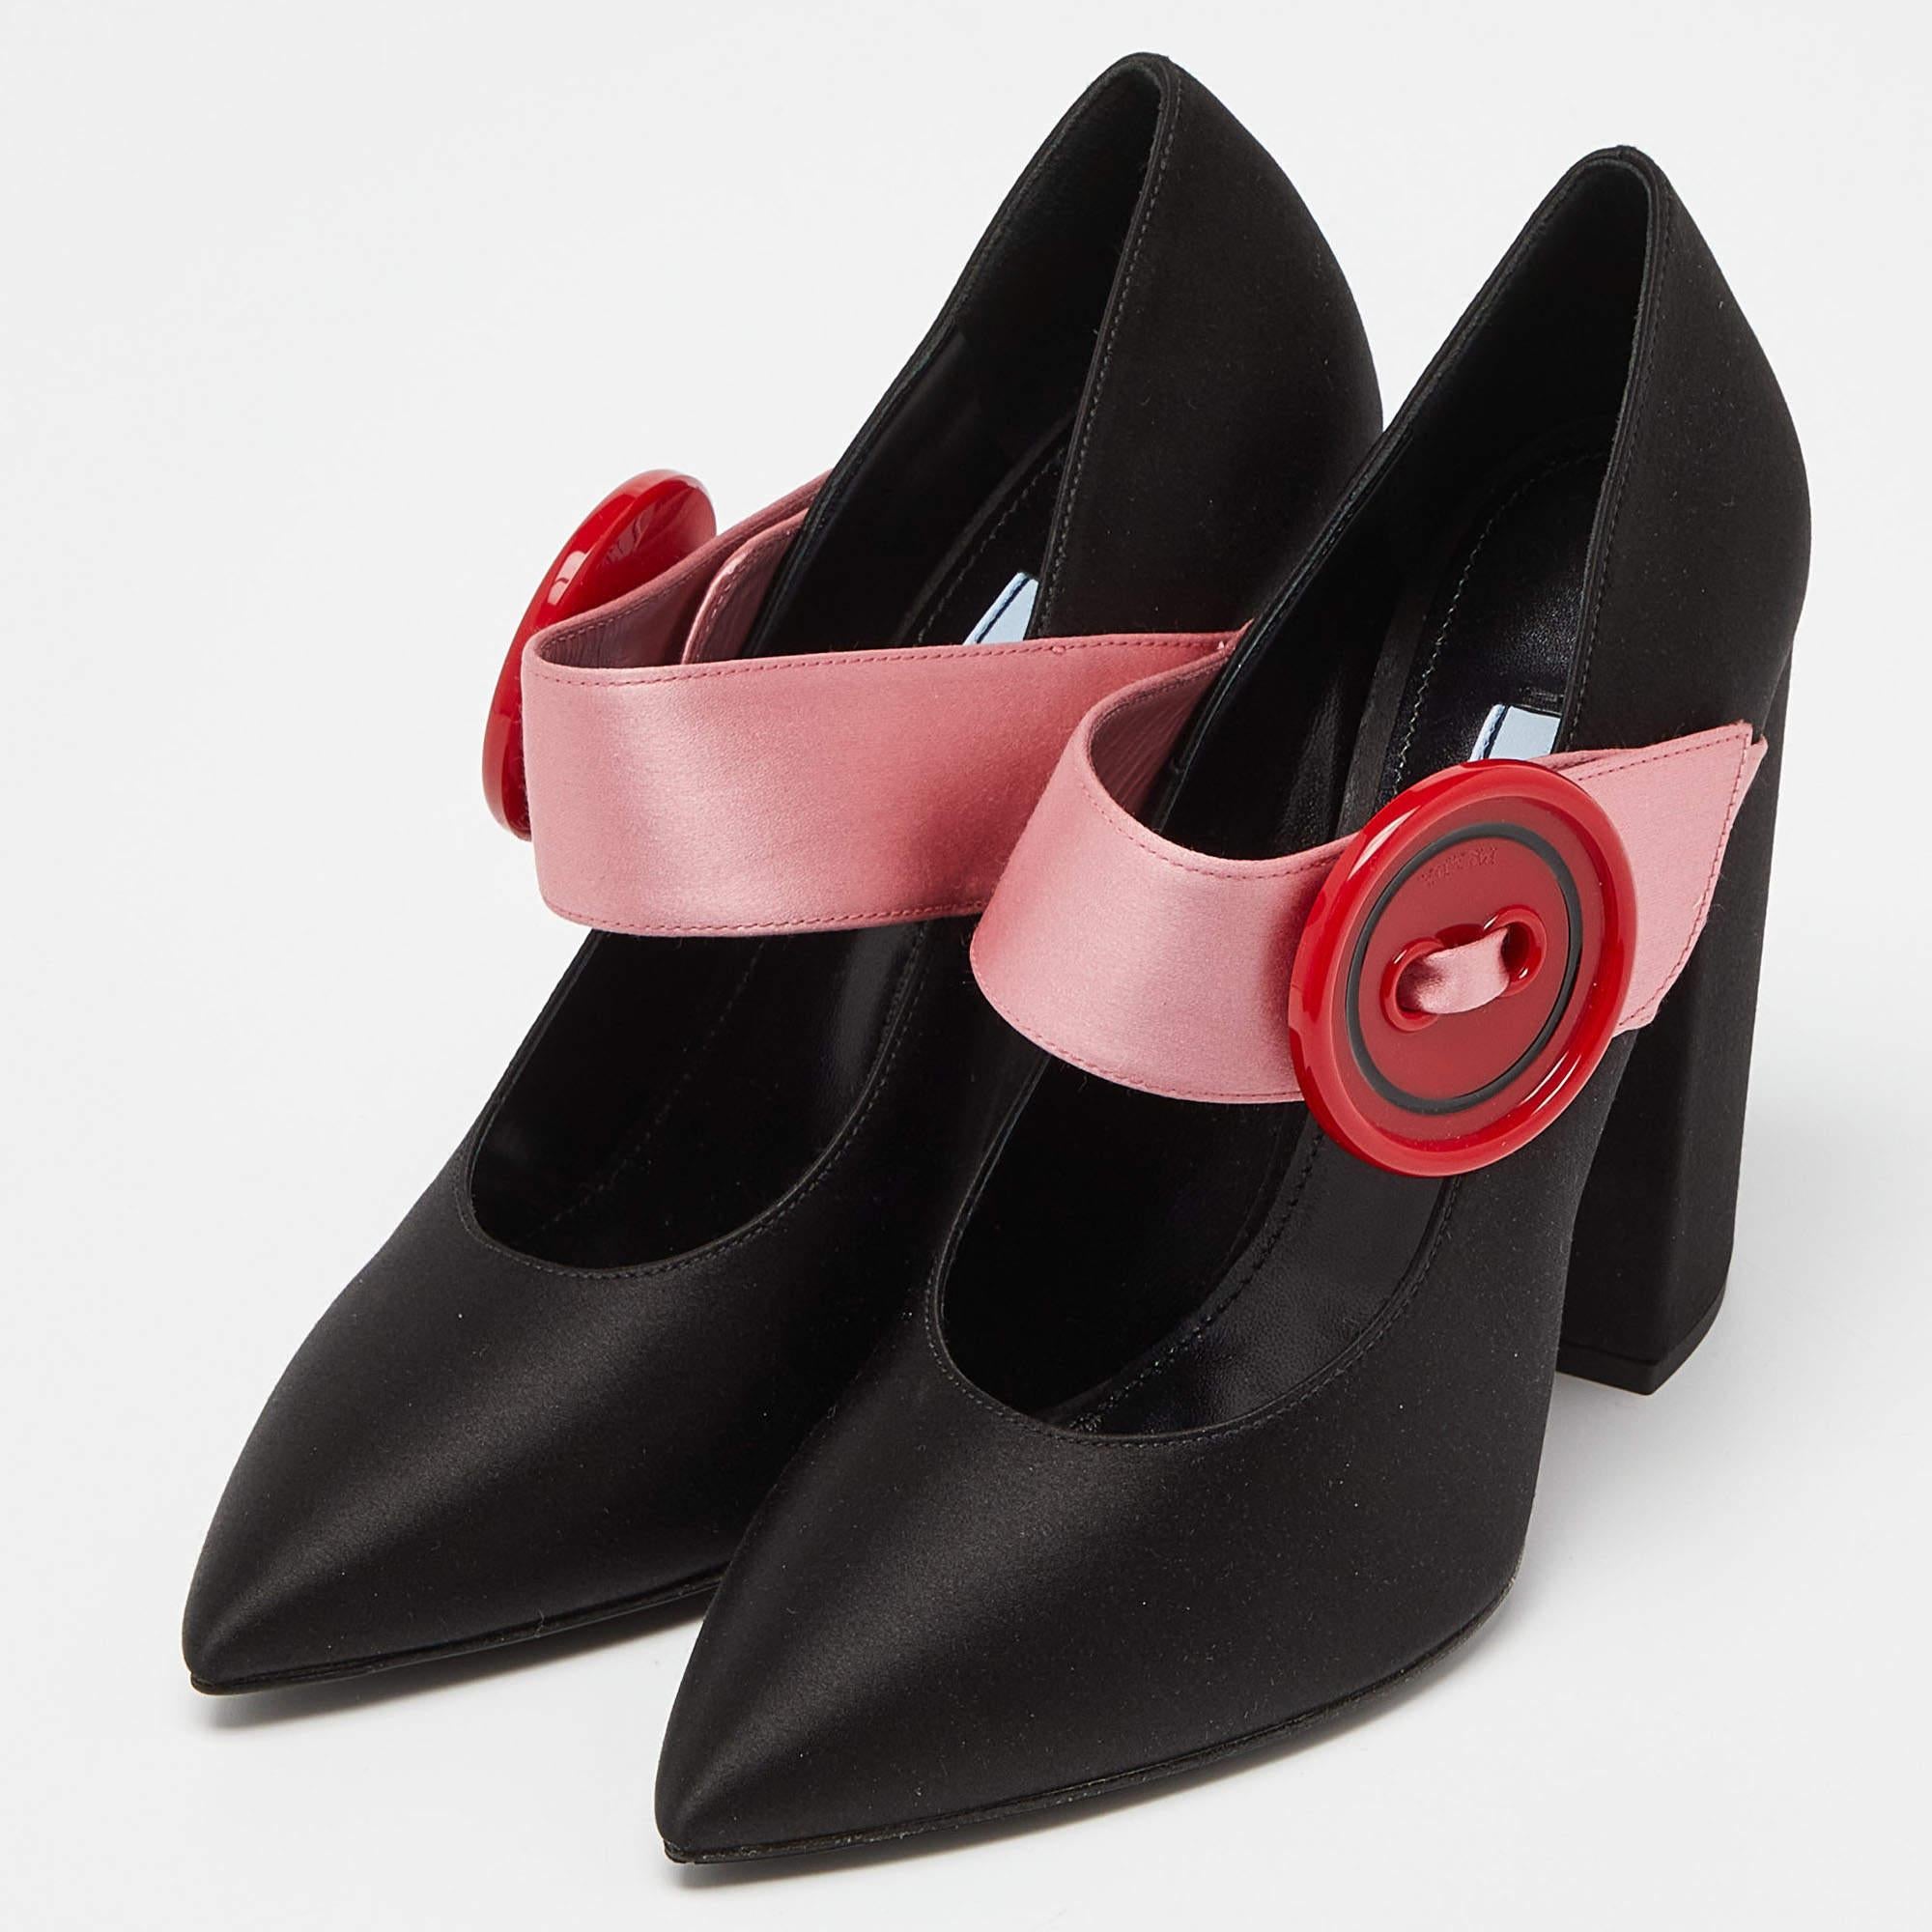 Make a chic style statement with these Prada block heel pumps. They showcase sturdy heels and durable soles, perfect for your fashionable outings!

